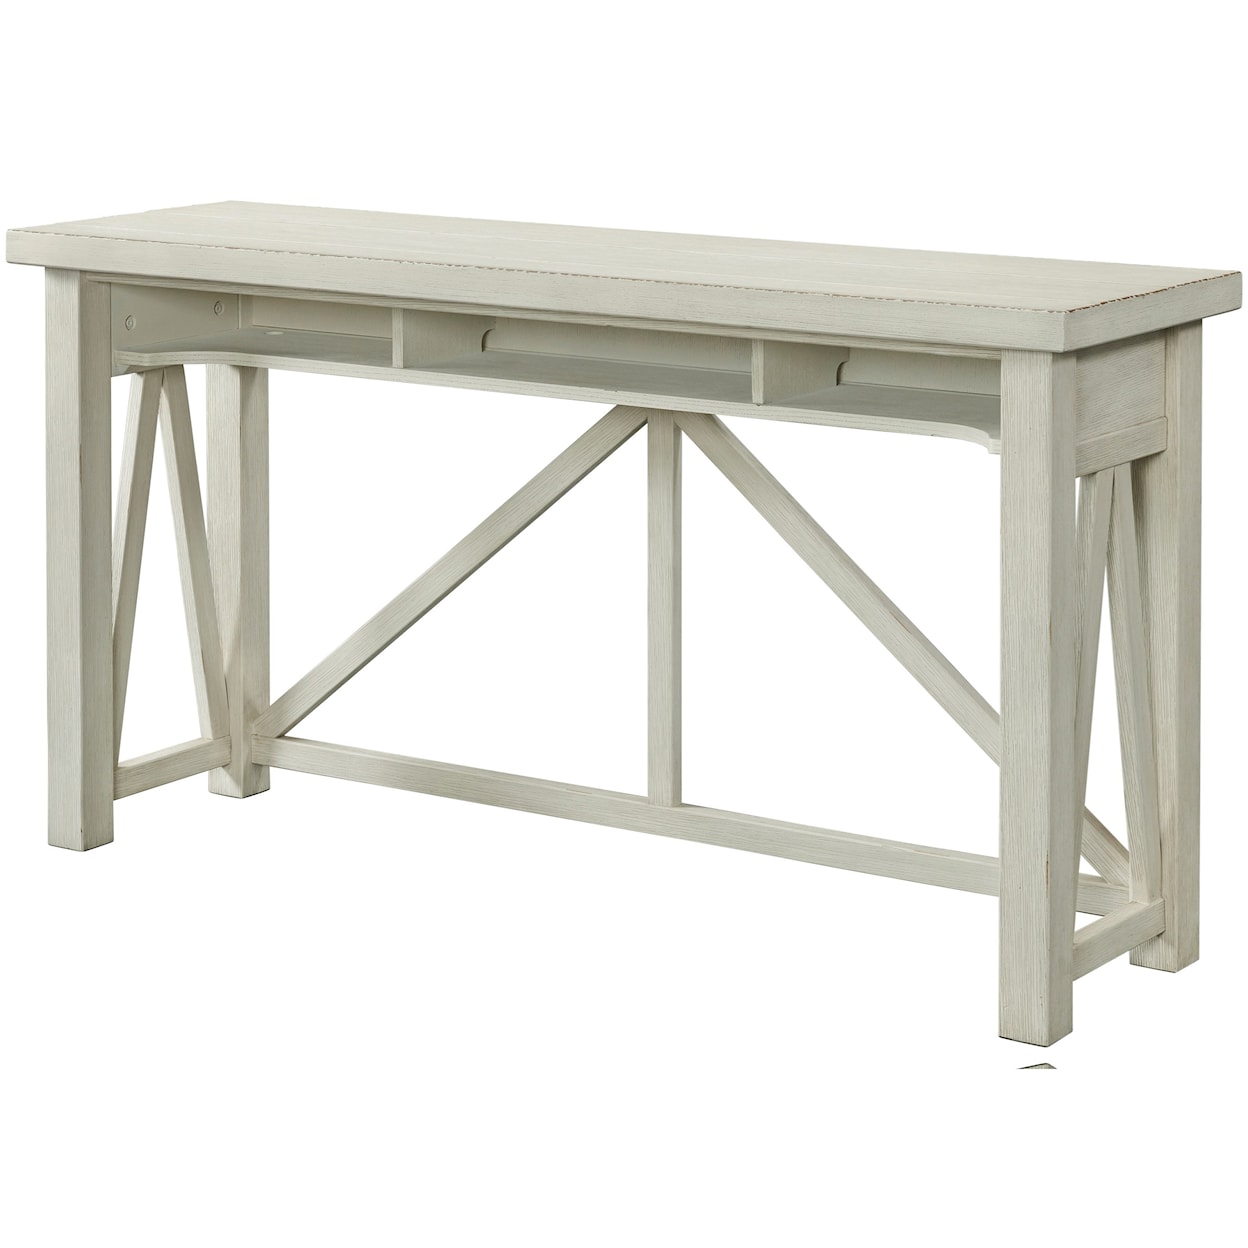 Riverside Furniture Aberdeen Sofa Table with Stools